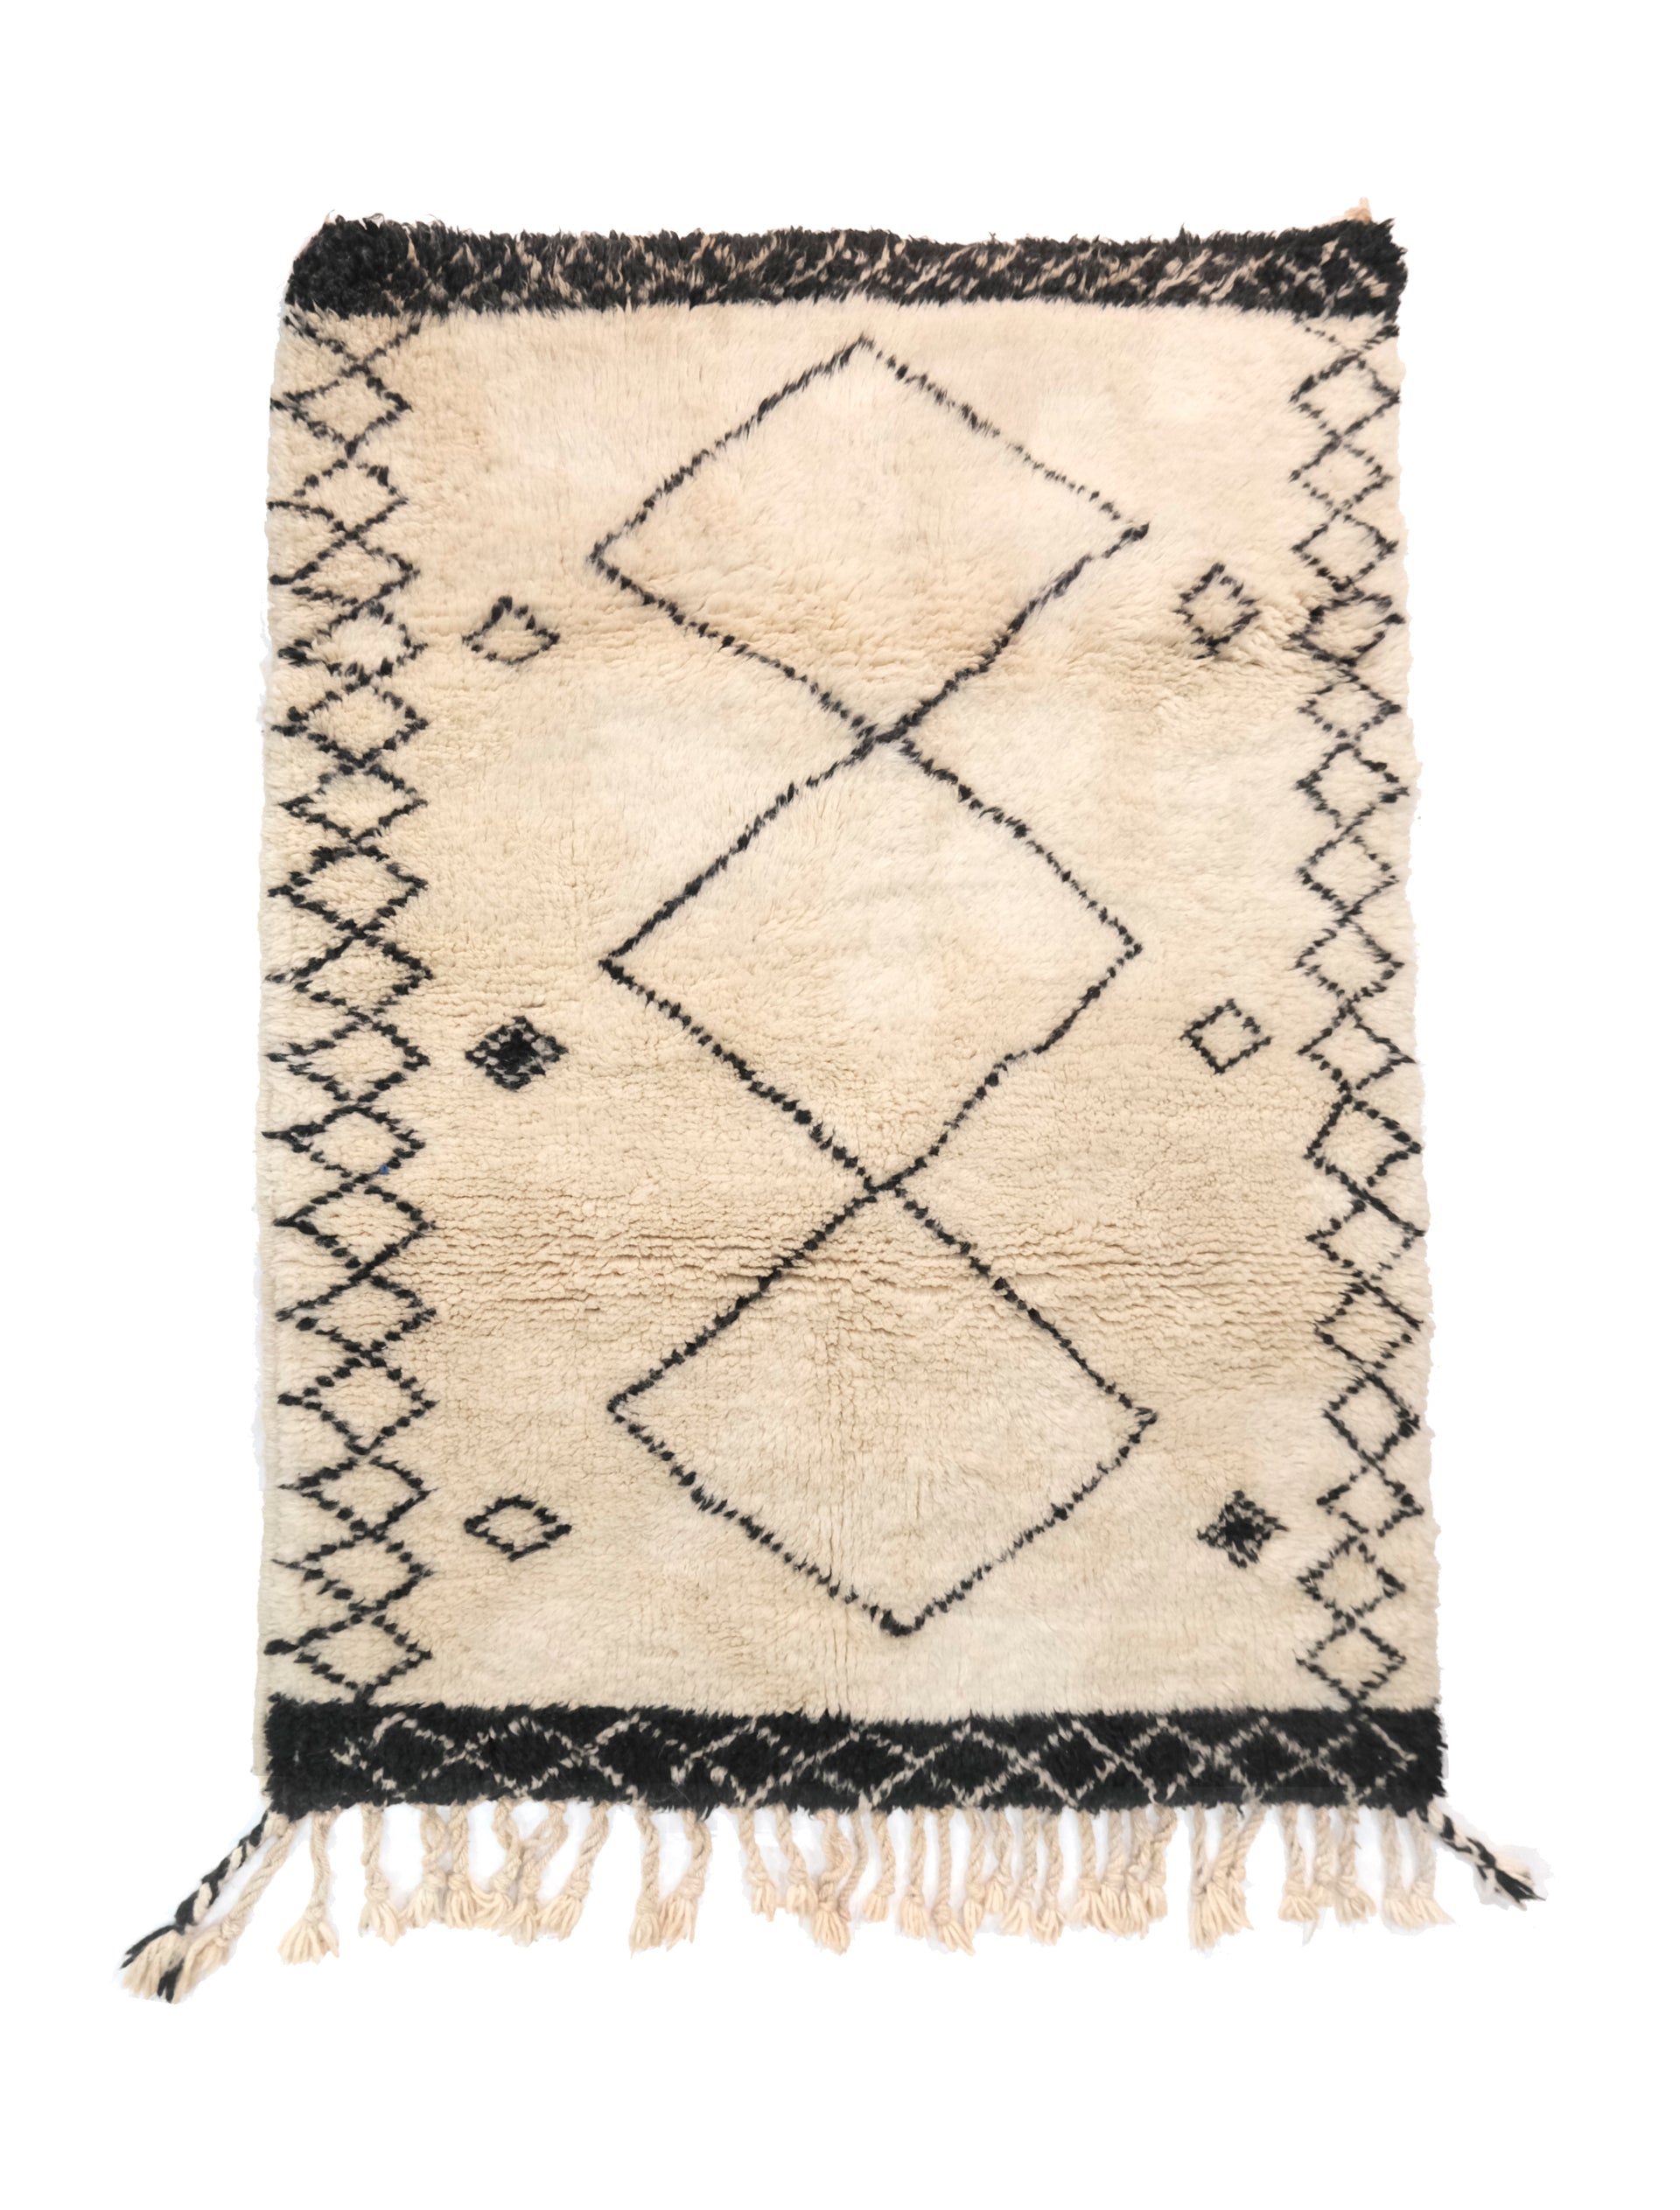 Discover elegance with our "Monochrome Diamond Ensemble" Beni Ourain Rug, sized at 3.7 x 4.9 feet. Its ivory base features three prominent diamond shapes in a delicate black outline at the center, complemented by two rows of smaller diamonds on each side. Meticulously crafted, this rug effortlessly blends tradition and modern design, making it a versatile and captivating addition to any space. Elevate your home with timeless Berber beauty.